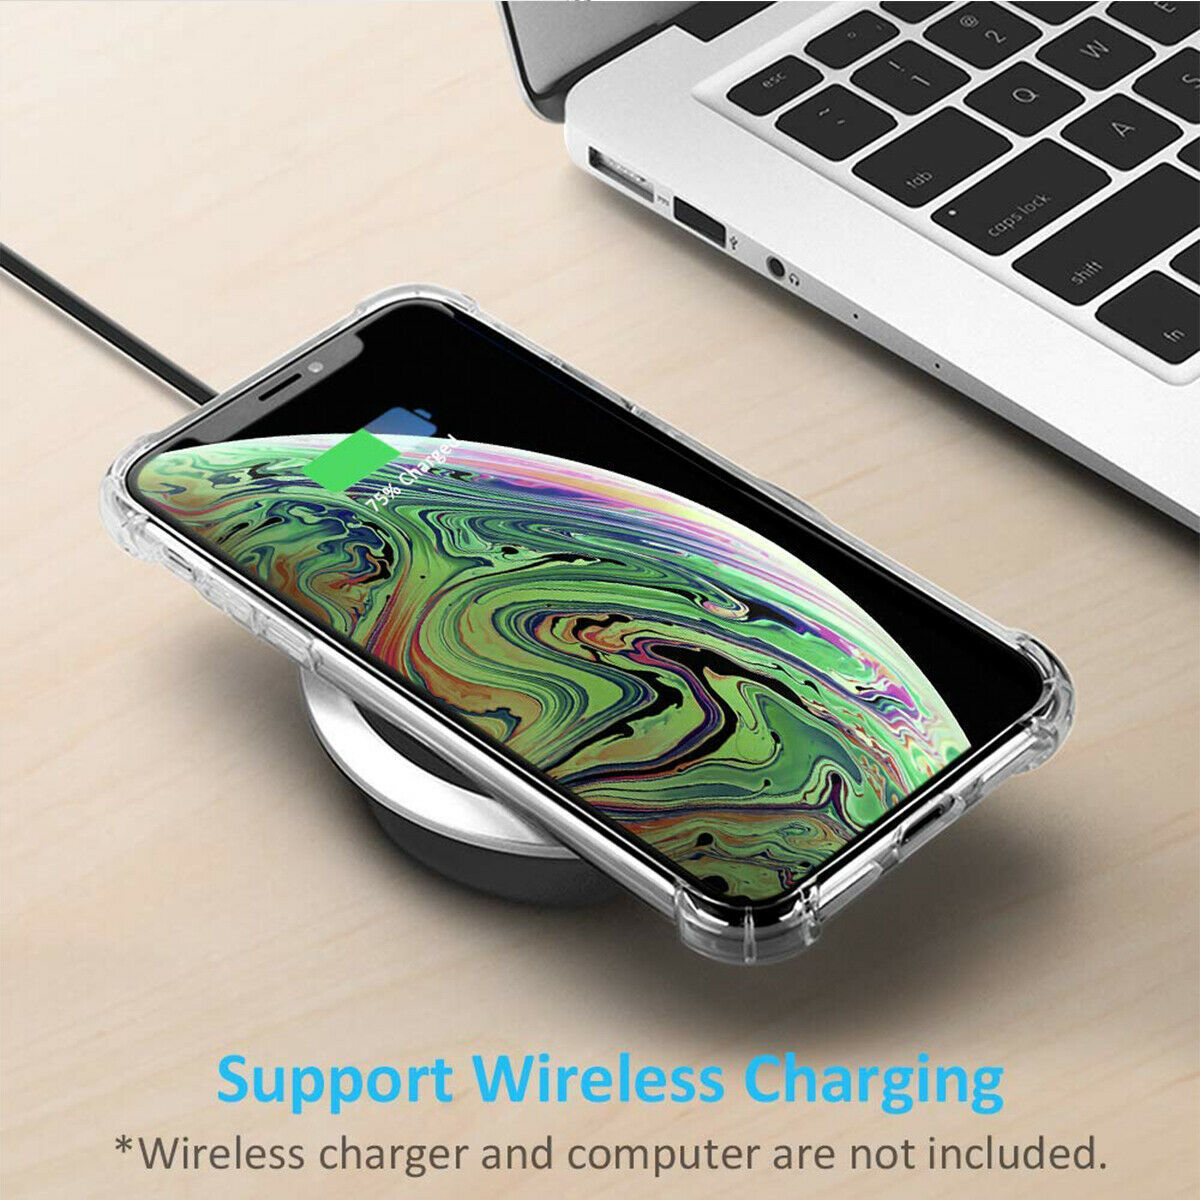 Case Silicone Gel Shockproof Protective Clear Cover For iPhone - carolay.co